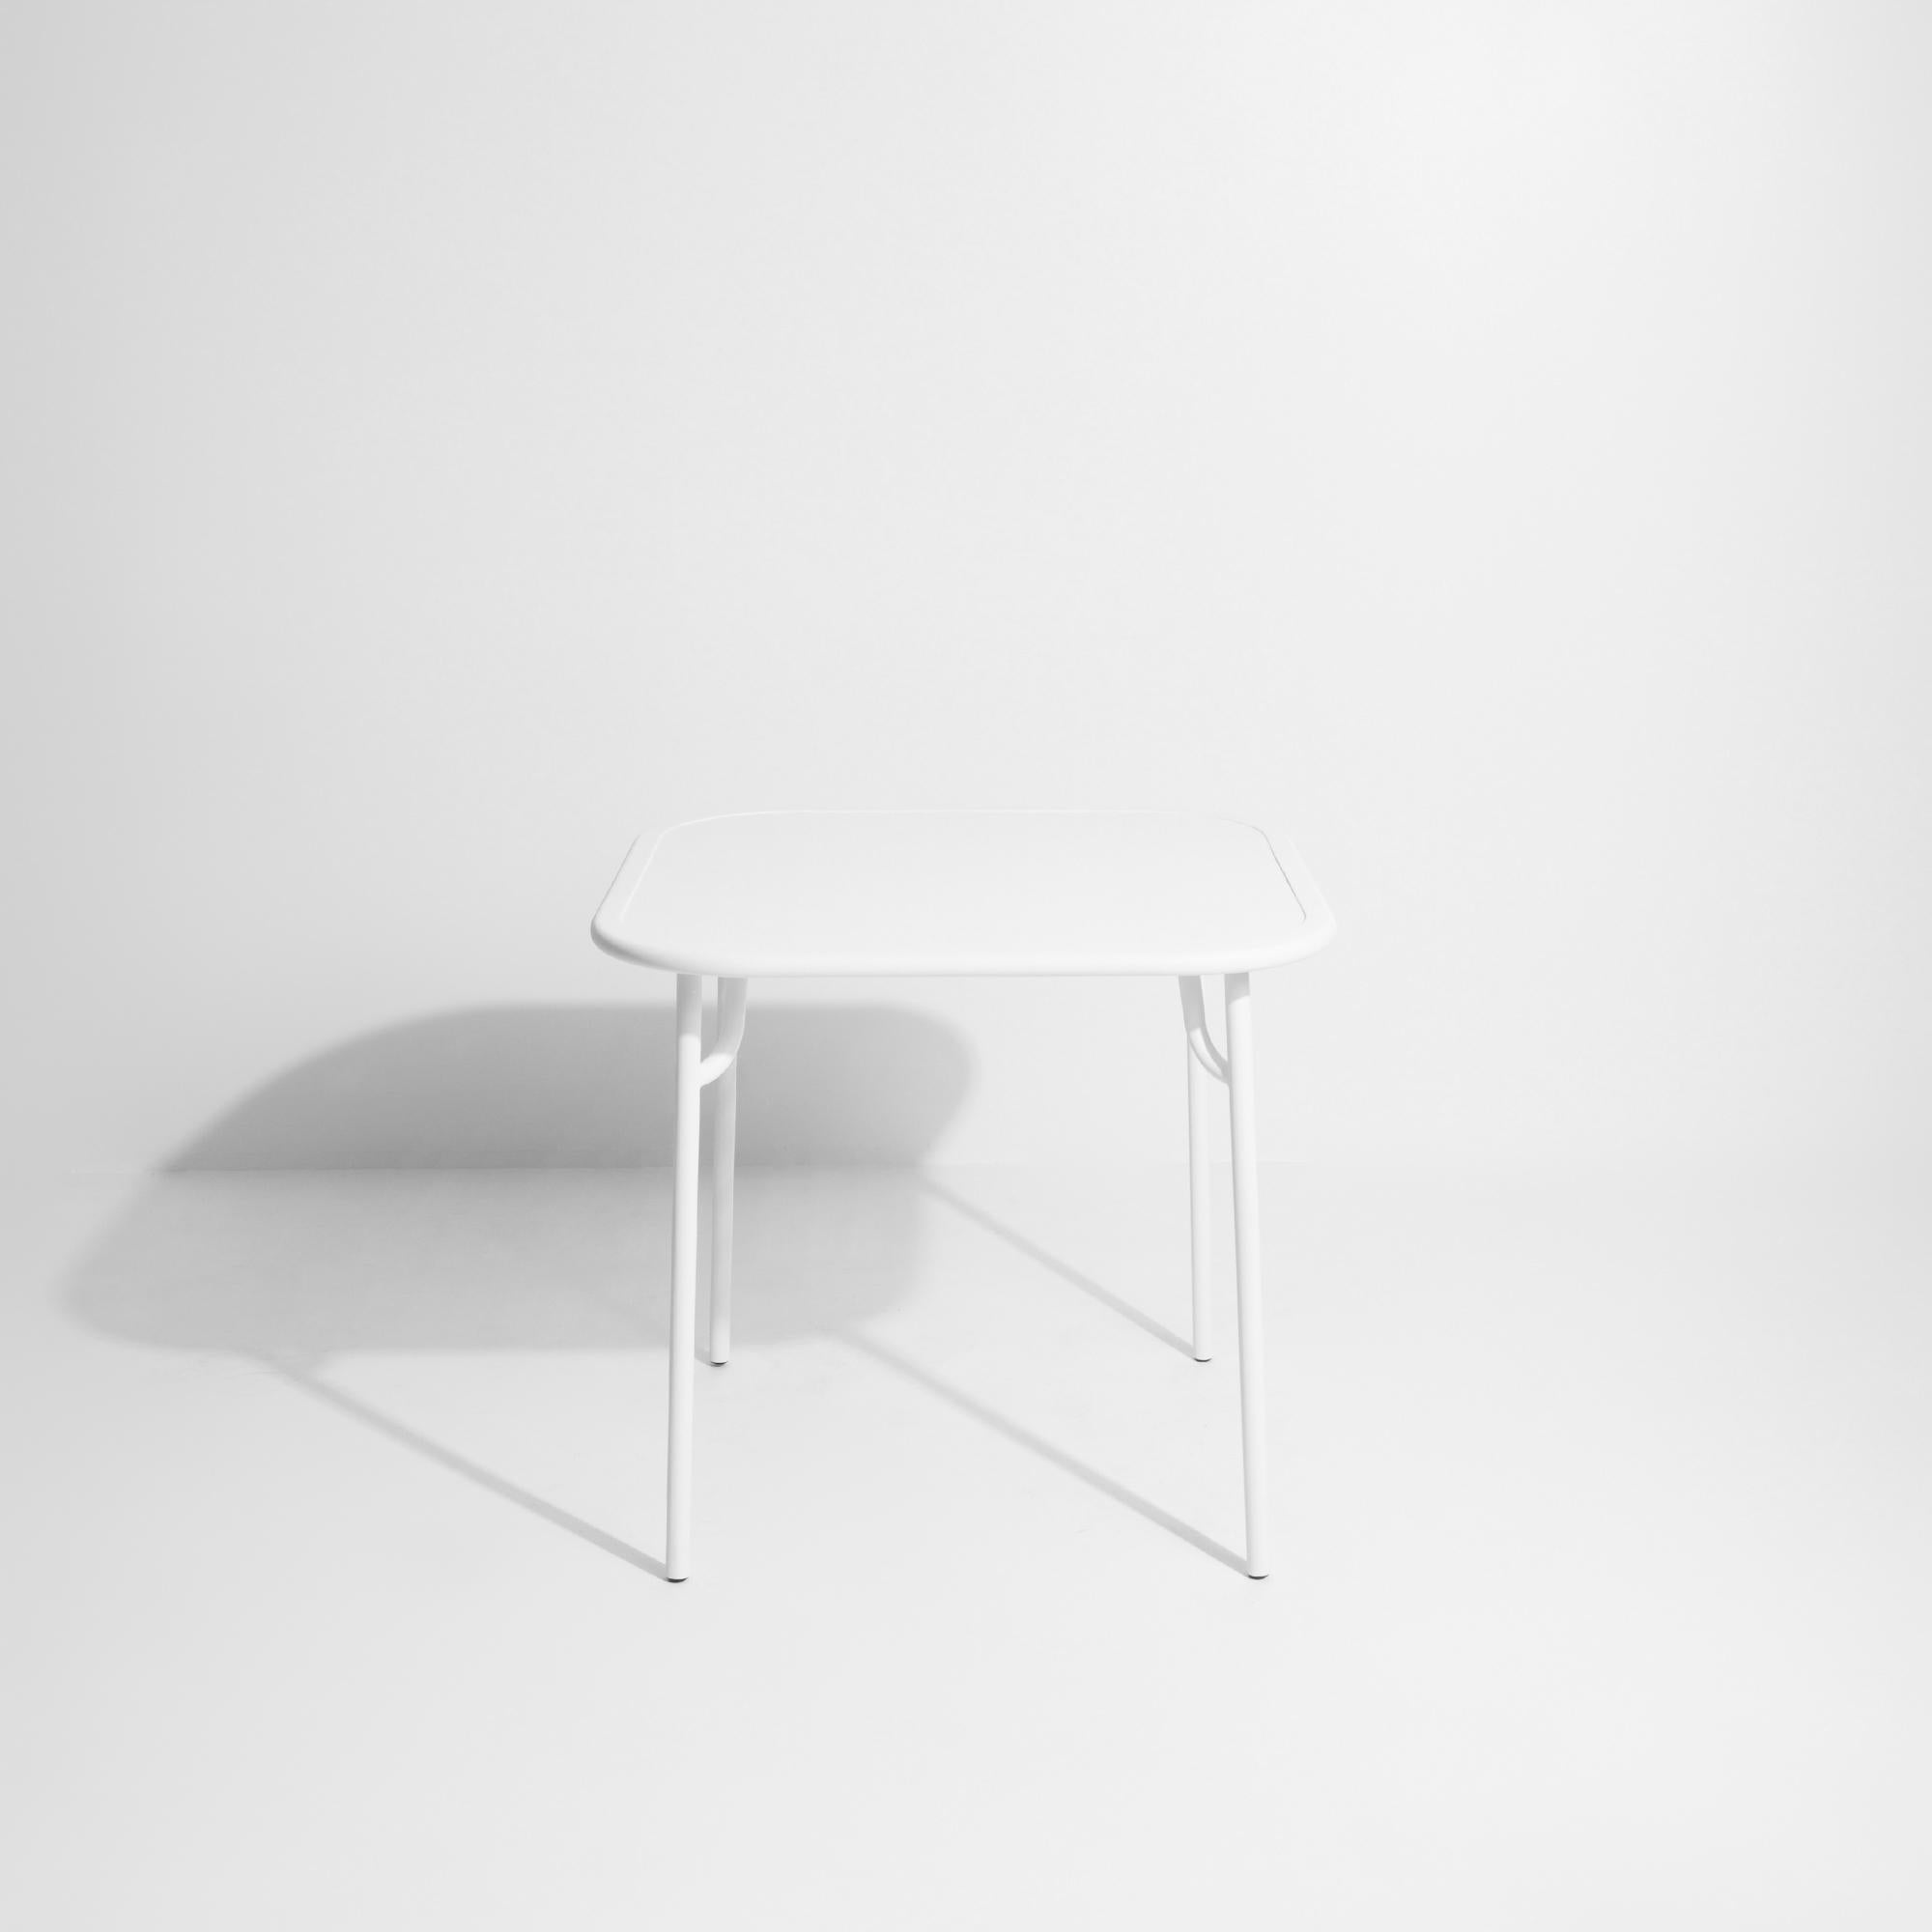 Petite Friture Week-End Plain Square Dining Table in White Aluminium, 2017 In New Condition For Sale In Brooklyn, NY